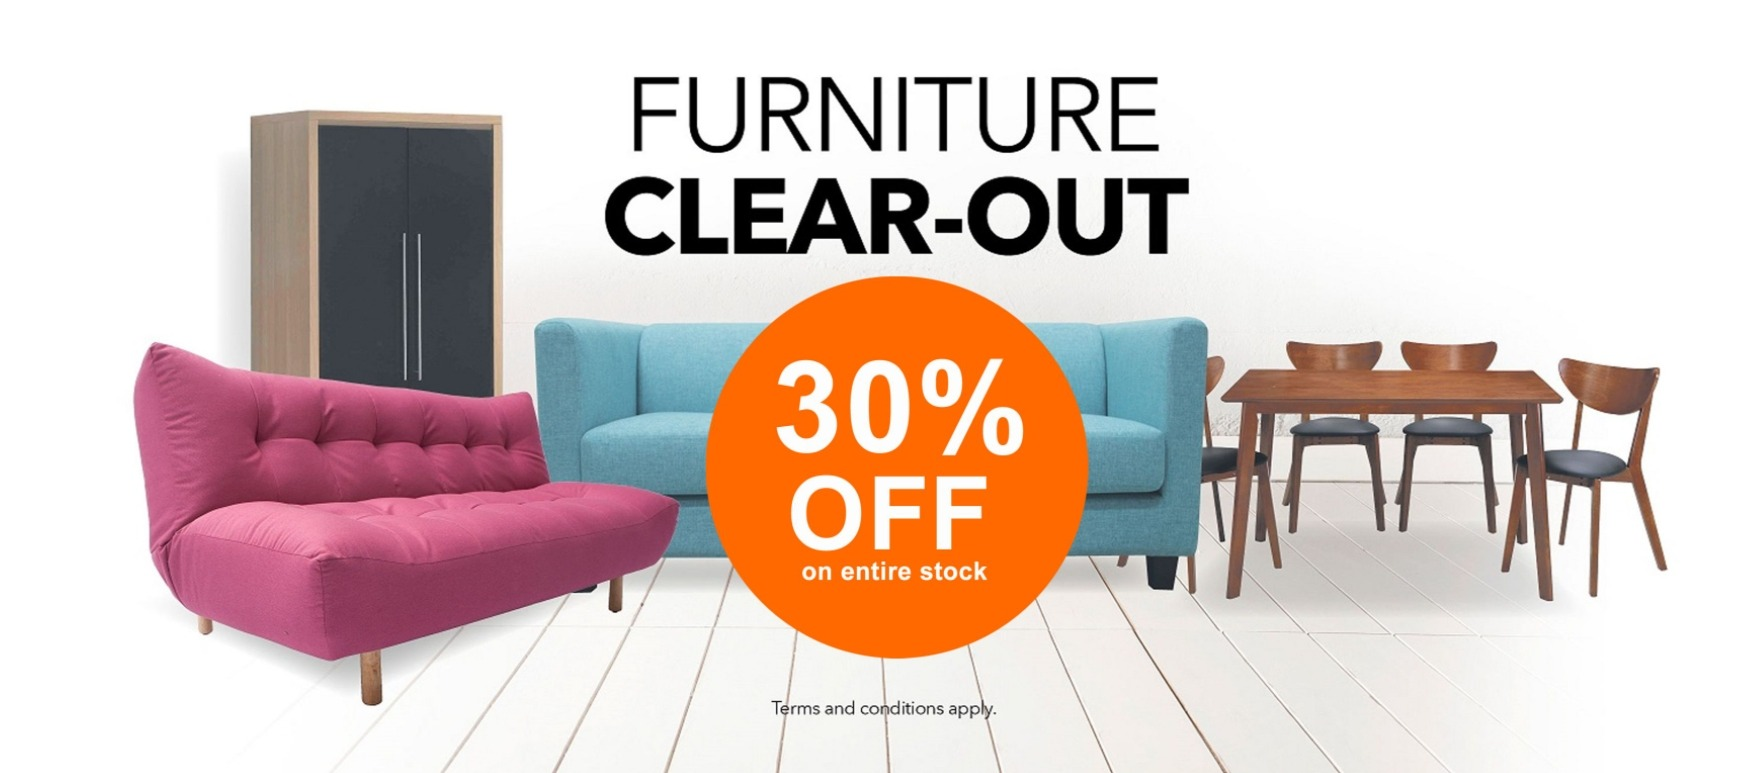 Promote your furniture products